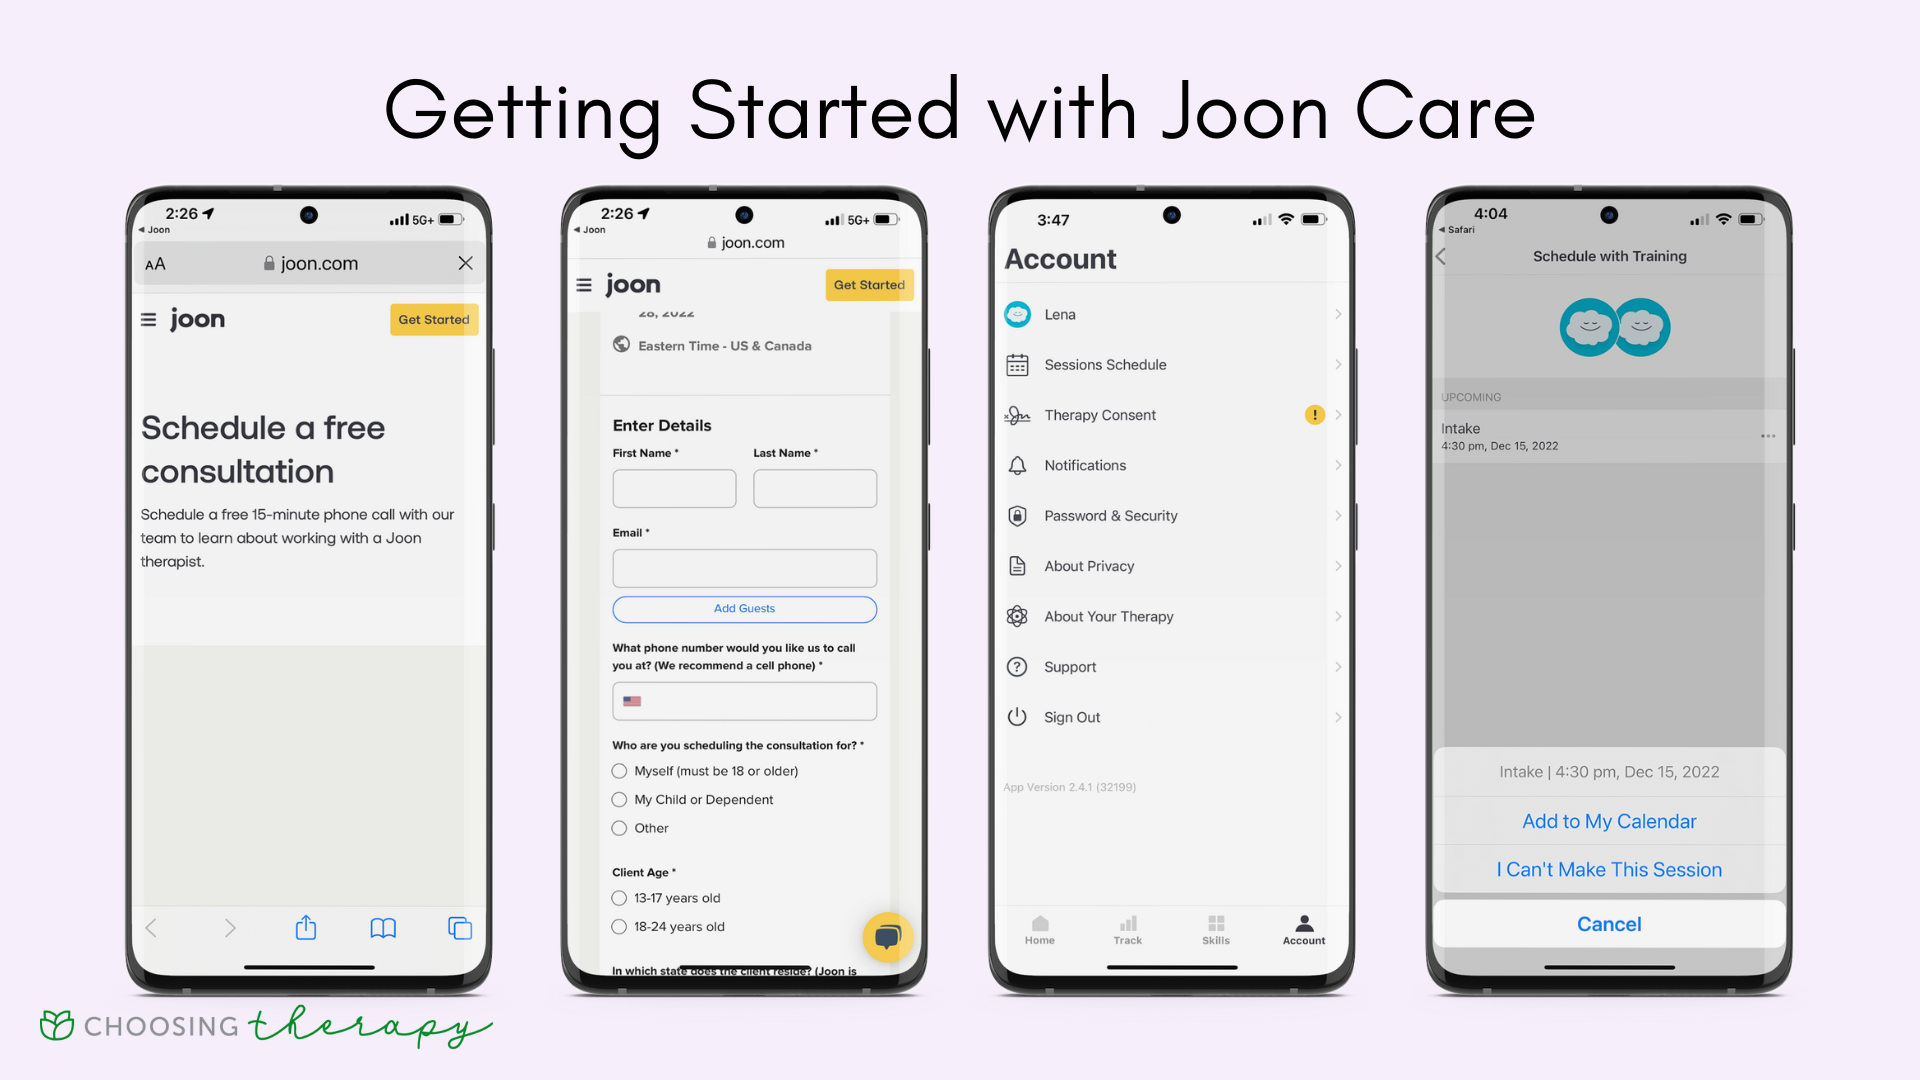 Joon Care Review 2023 -- Image of how to get started with Joon Care, schedule a free consulation, enter personal information, schedule a live session